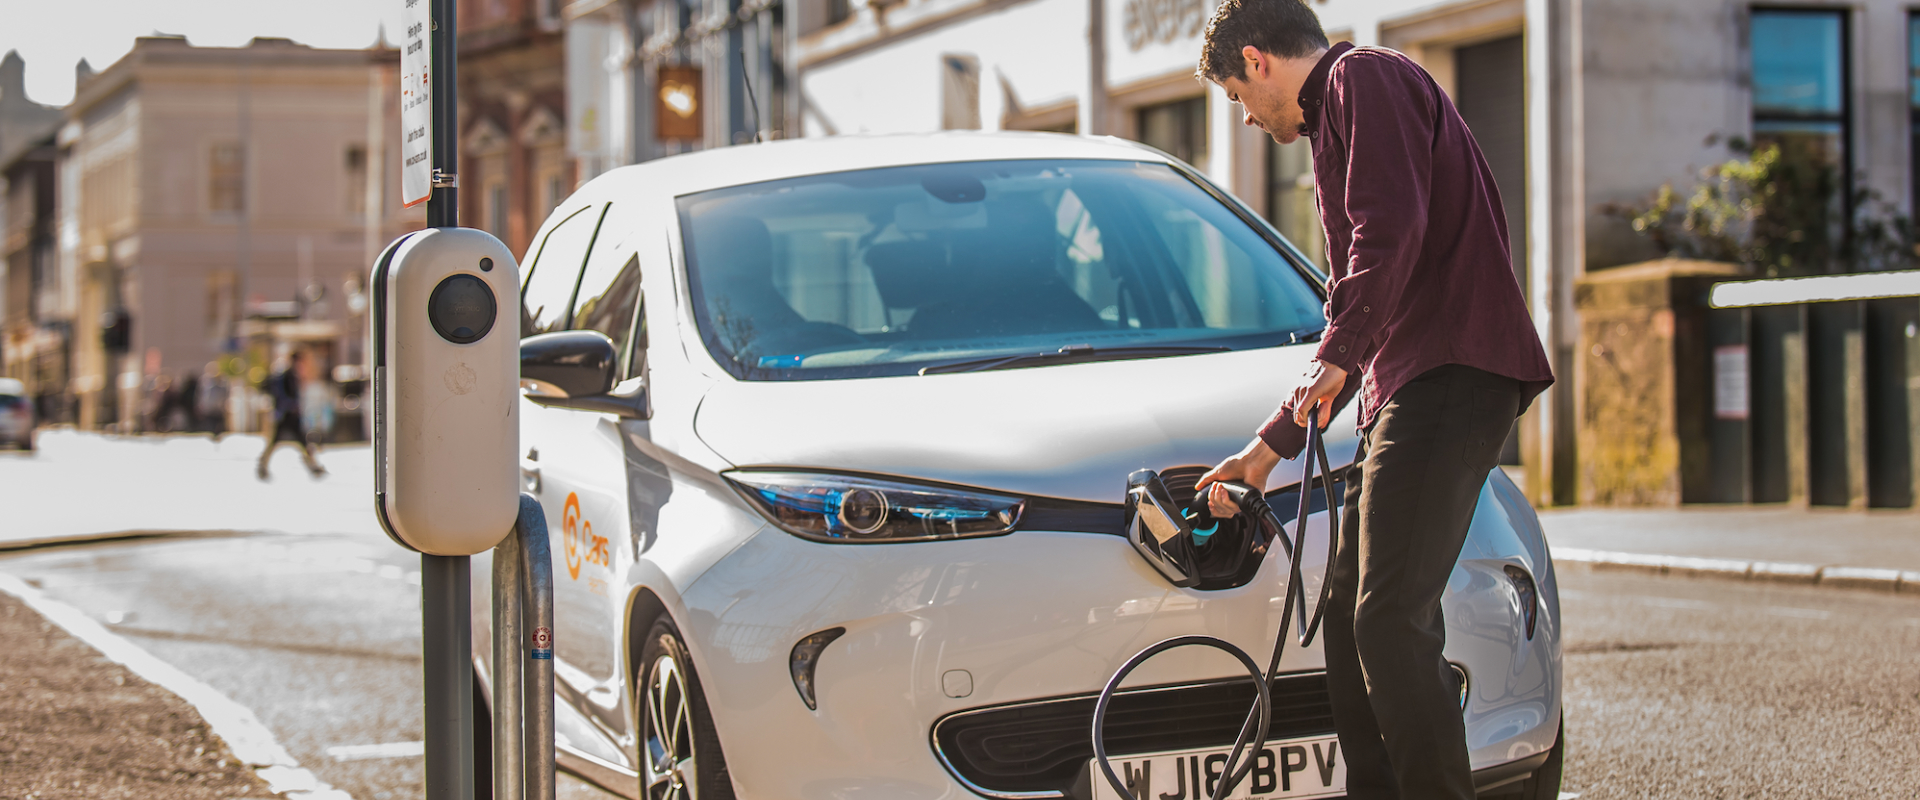 Co-Cars in partnership with Electric Car Chargers to service and maintain their charging equipment